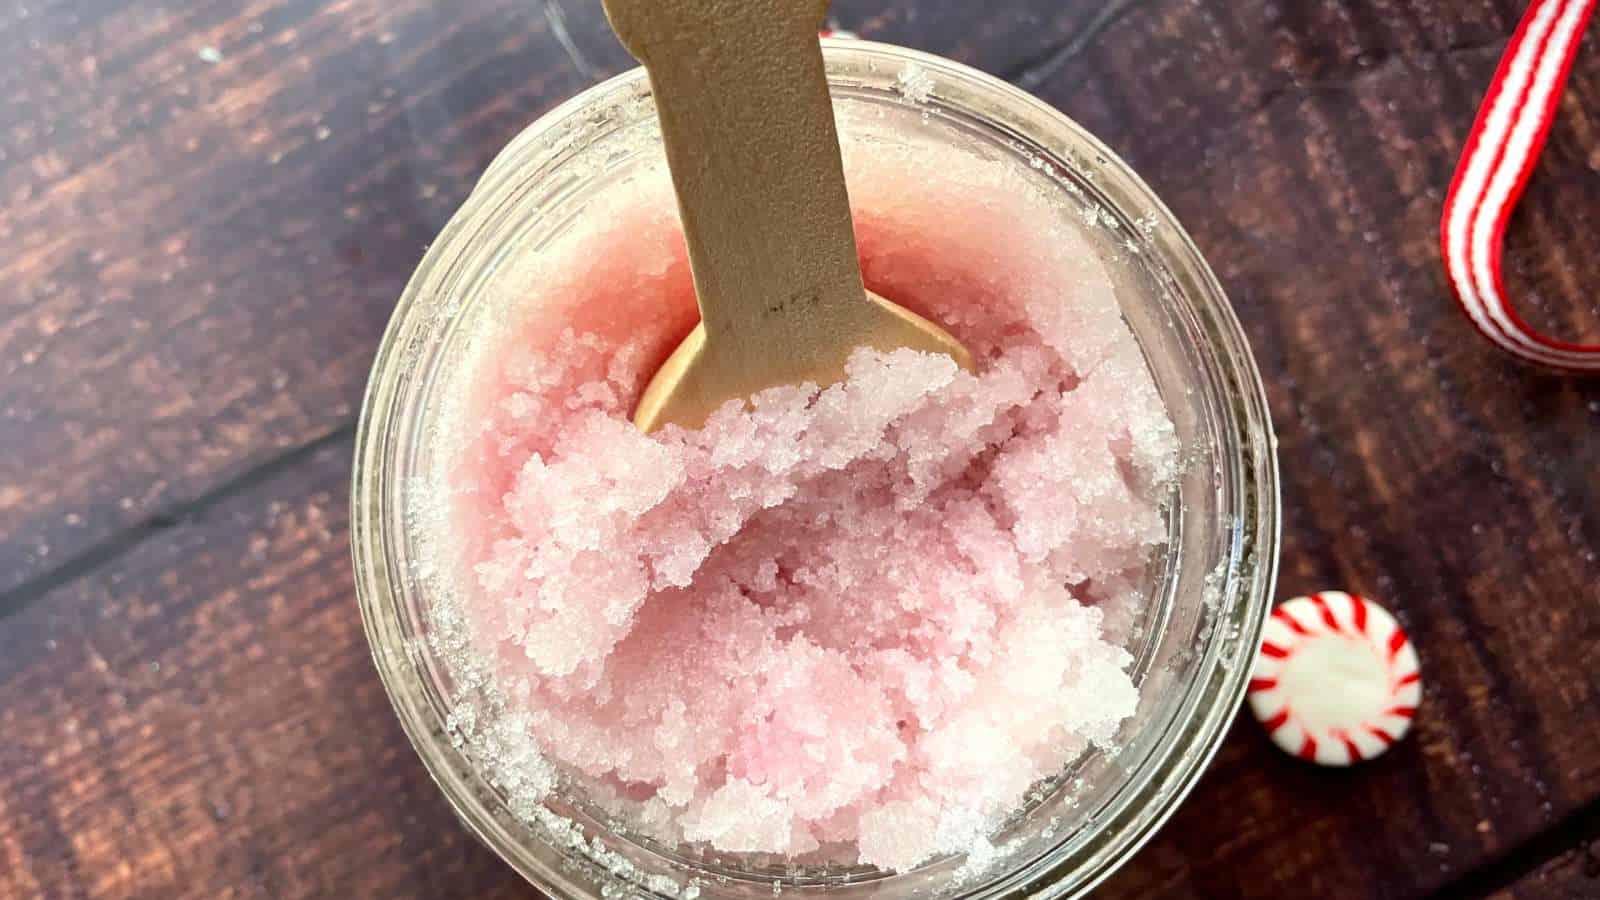 A mason jar of peppermint foot scrub with a wooden spoon and candy canes.